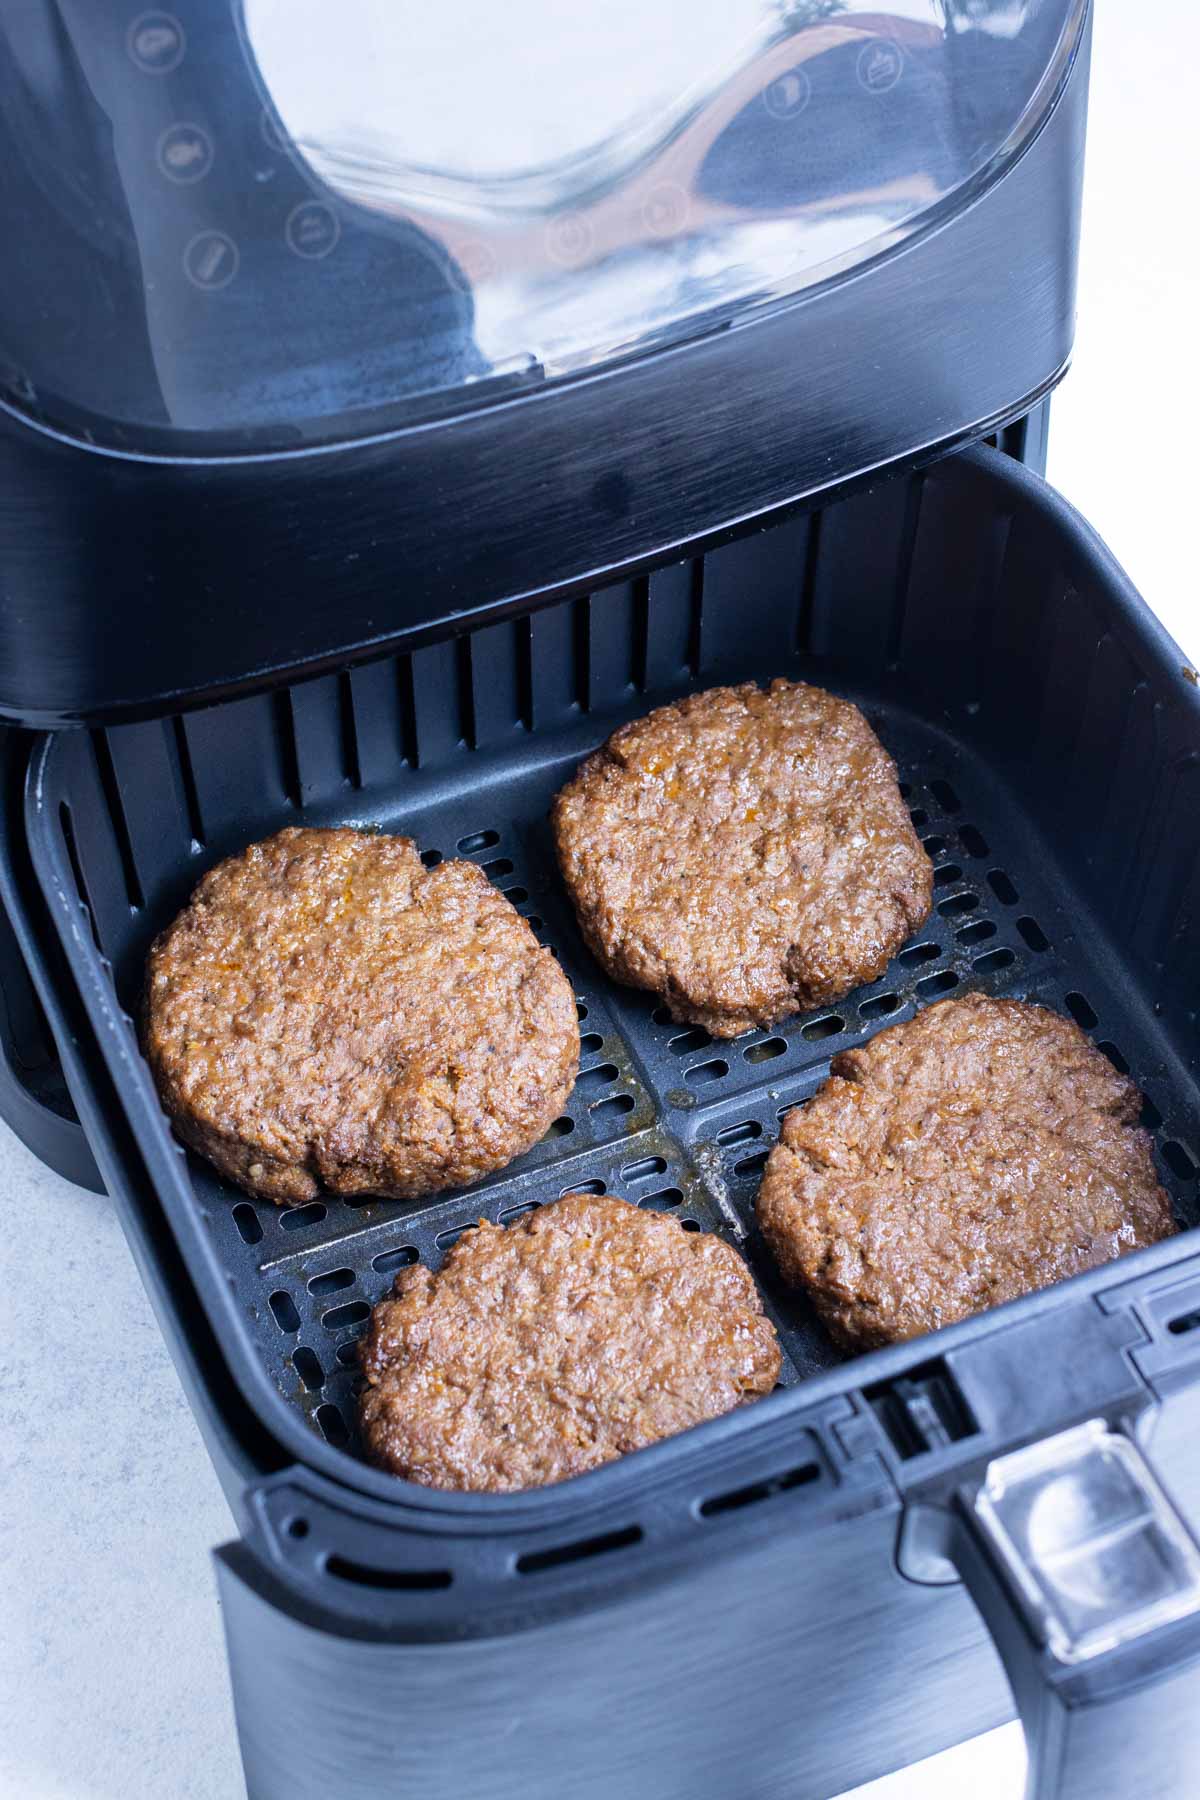 Air fryer hamburger patties are cooked until brown on the outside.